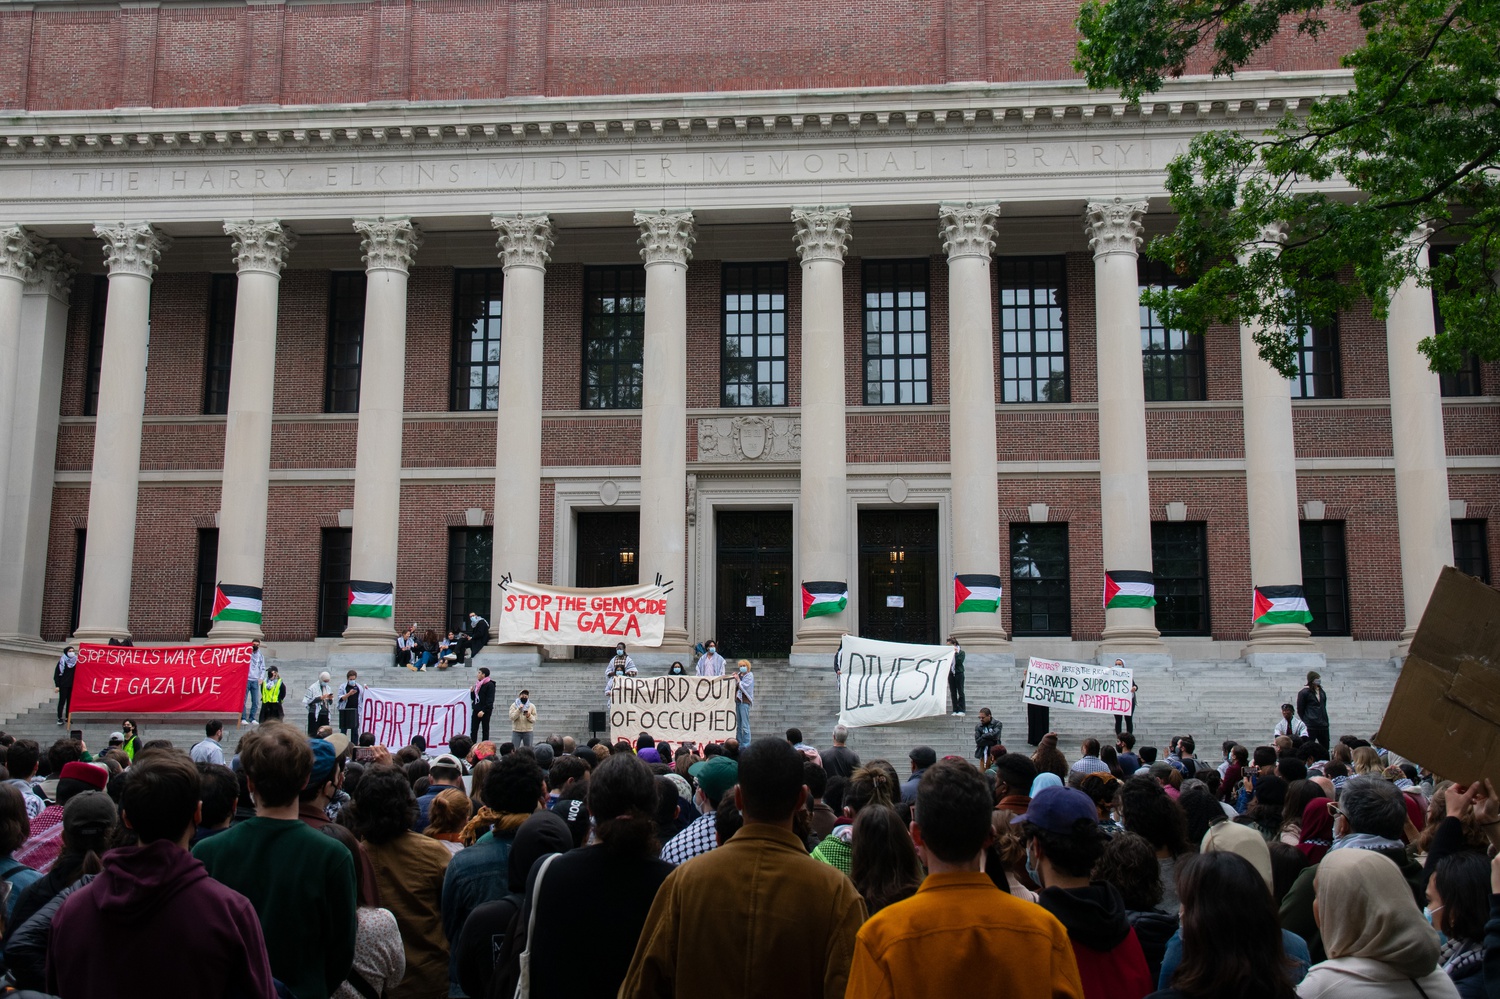 Hundreds of Harvard affiliates gathered in Harvard Yard in support of Gaza ahead of an expected ground invasion by Israel.